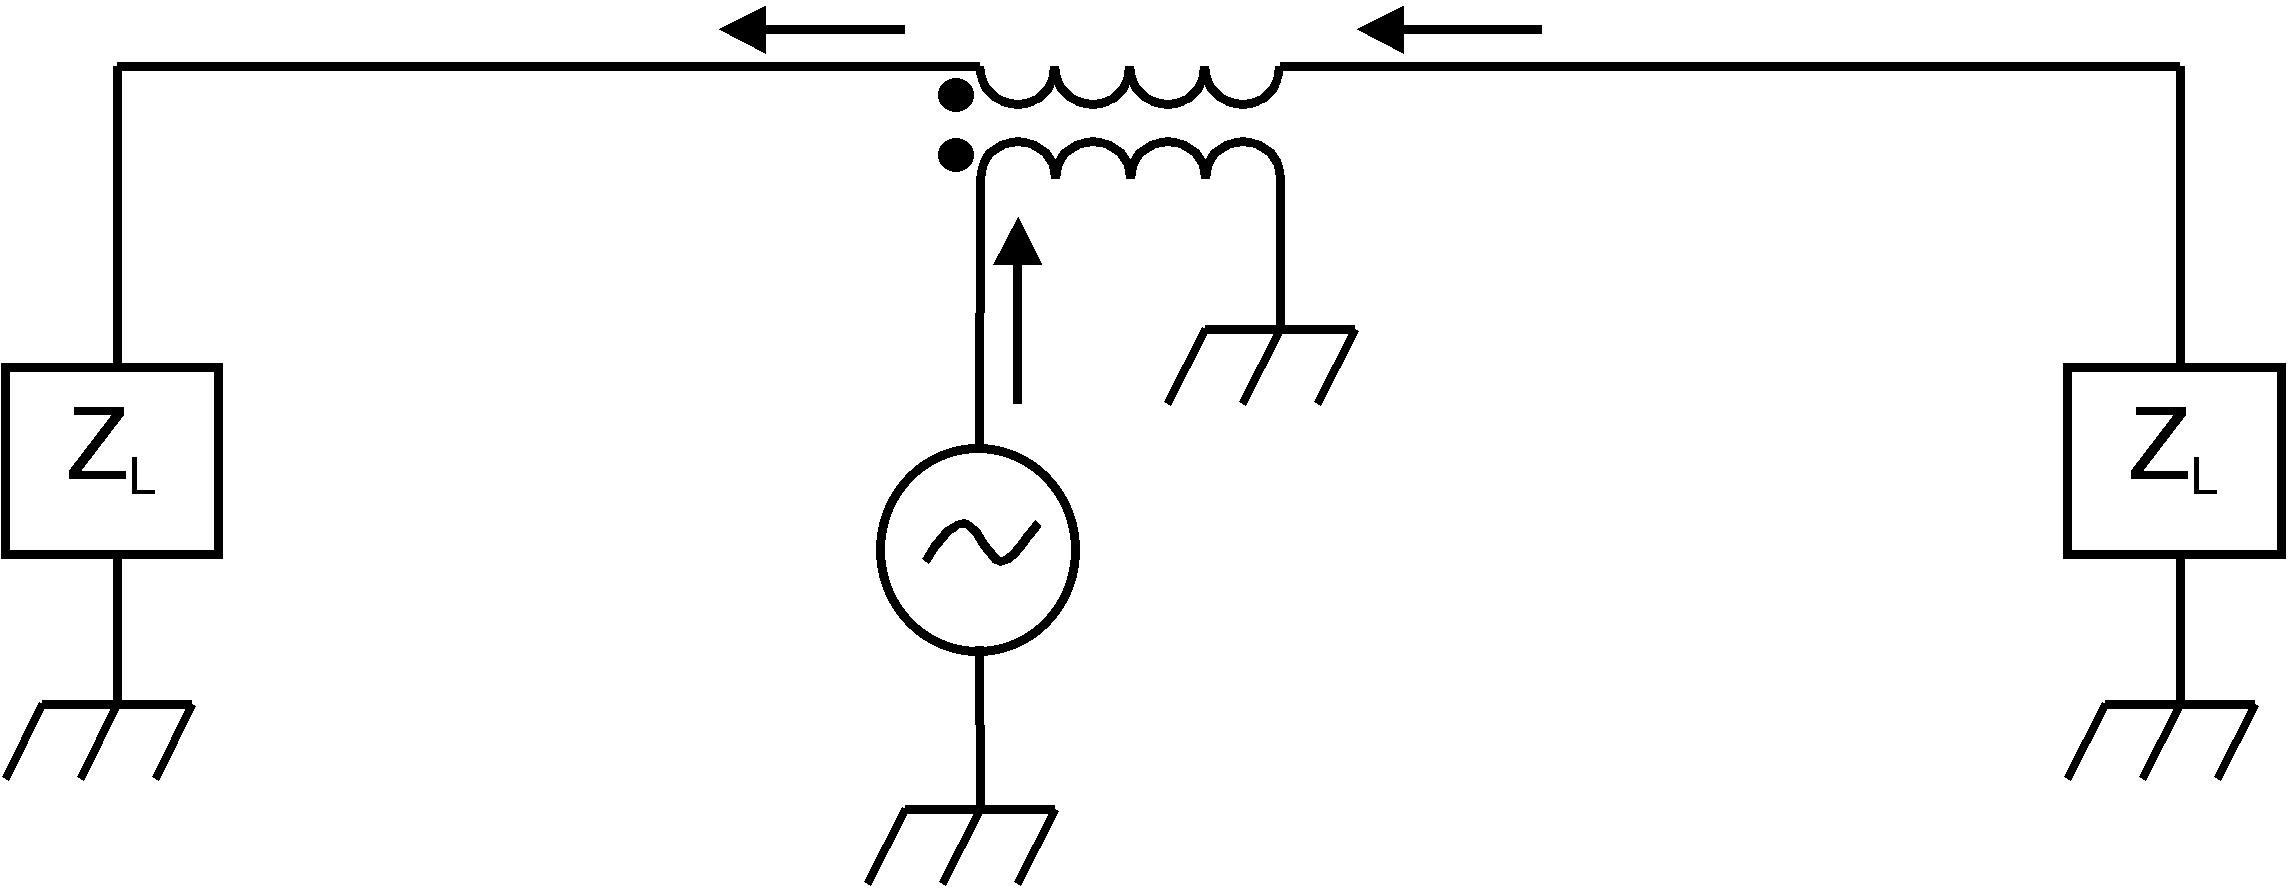 inductive coupling circuit